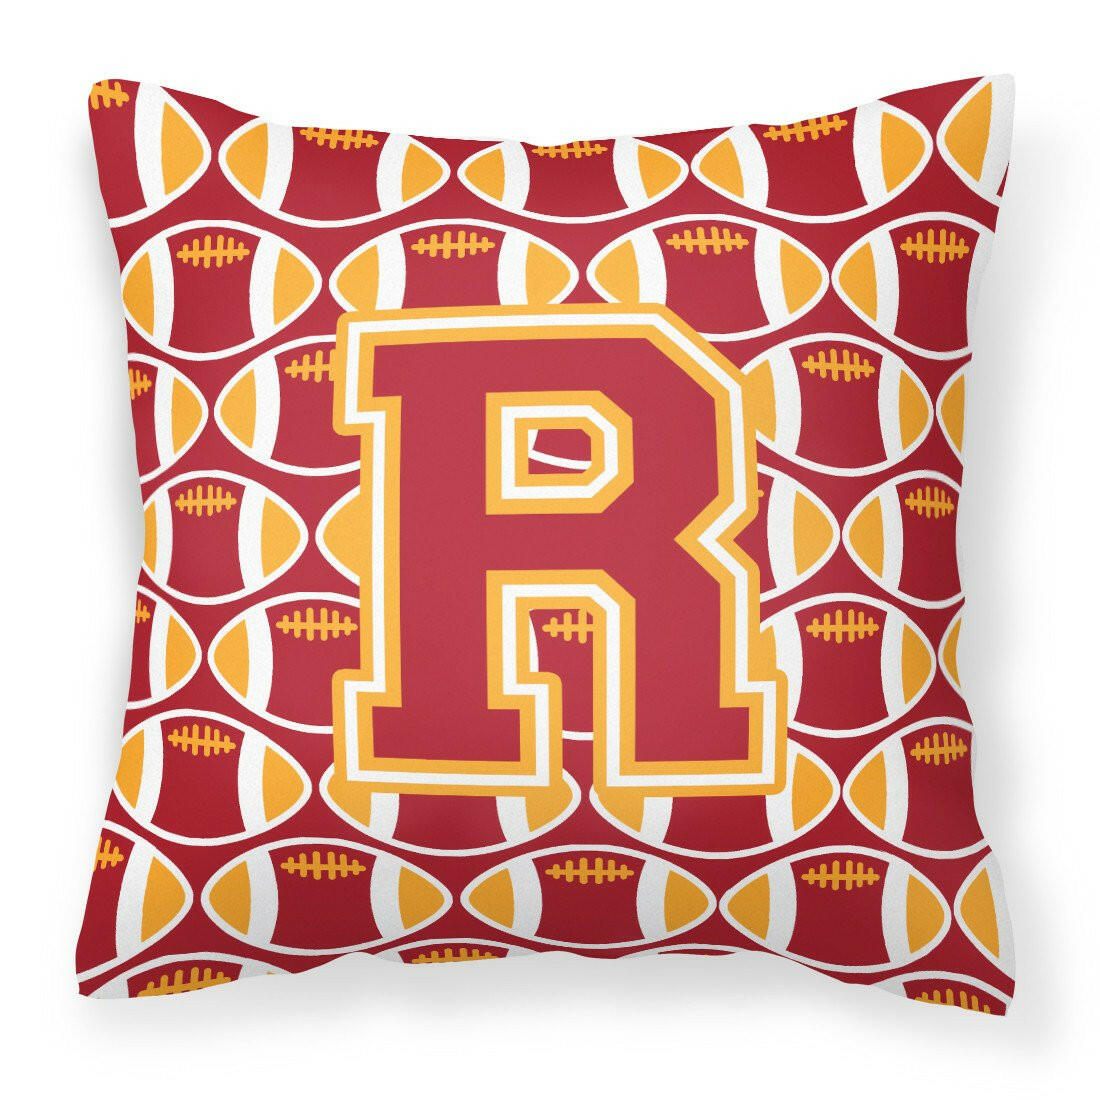 Letter R Football Cardinal and Gold Fabric Decorative Pillow CJ1070-RPW1414 by Caroline's Treasures